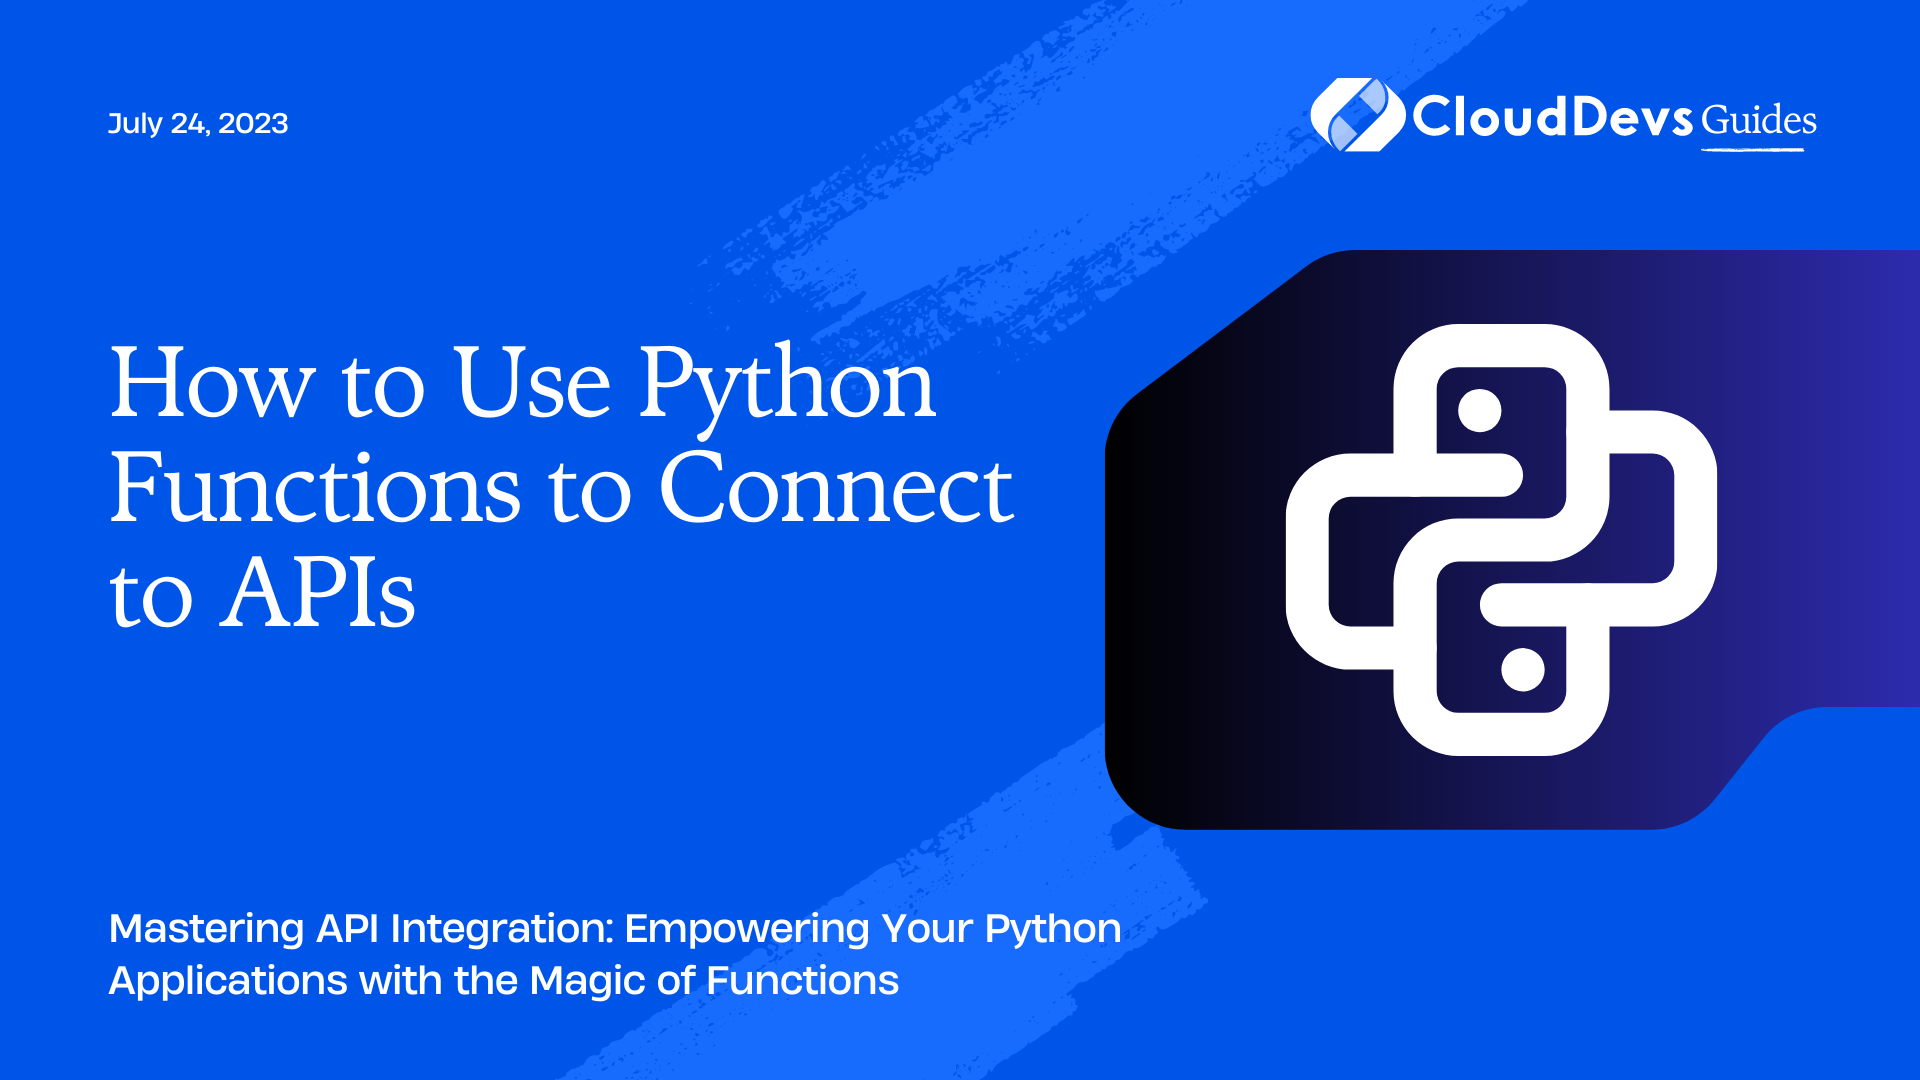 How to Use Python Functions to Connect to APIs